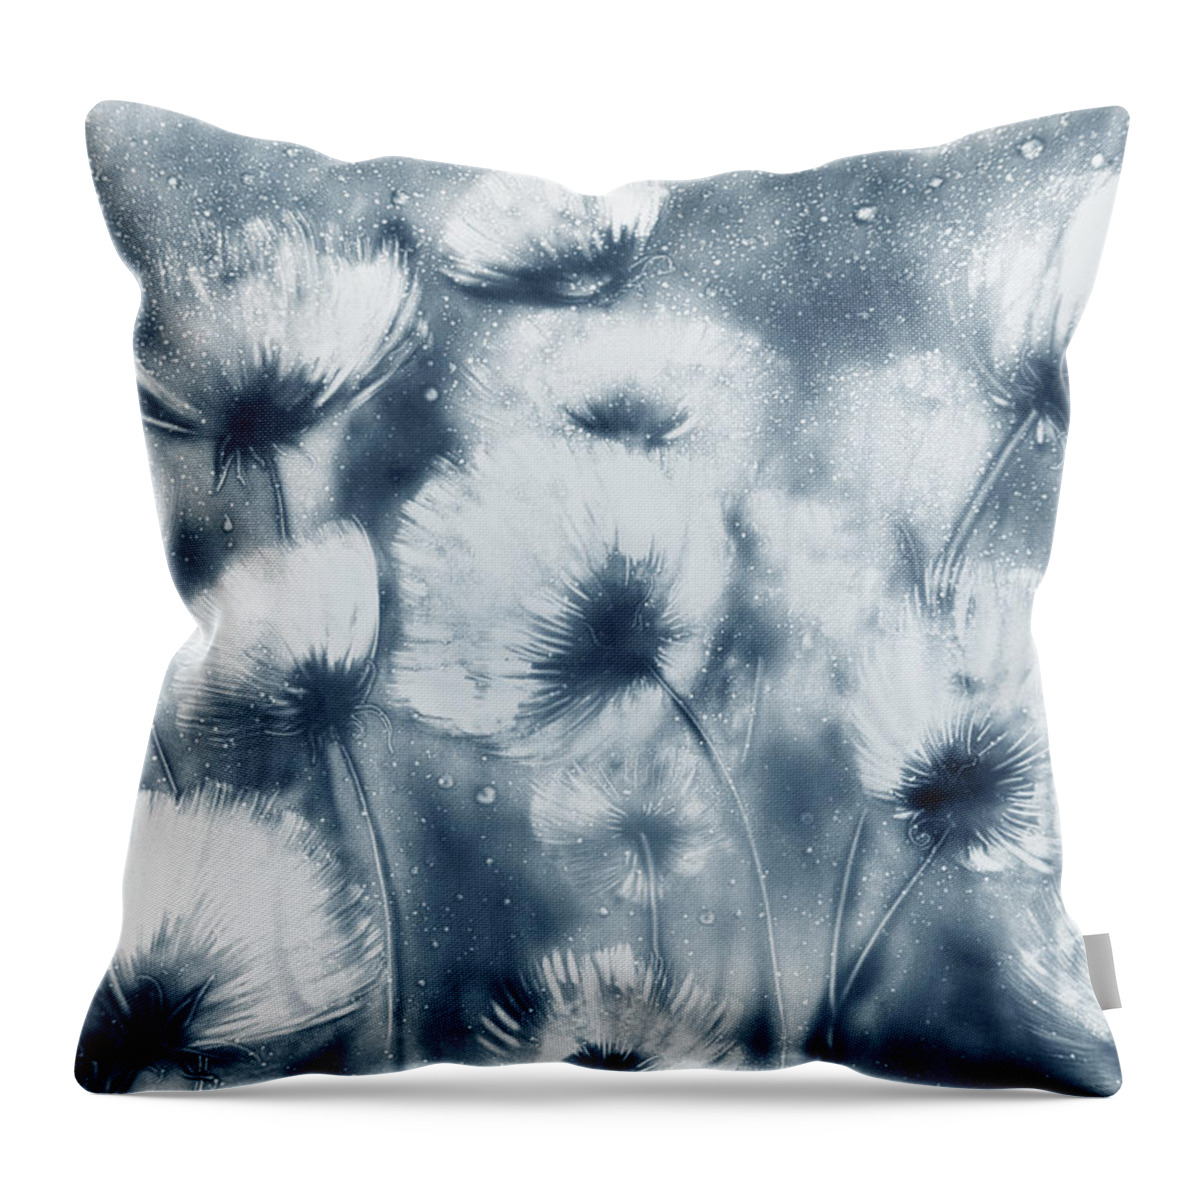 Flowers Throw Pillow featuring the drawing Summer Snow by Elena Vedernikova